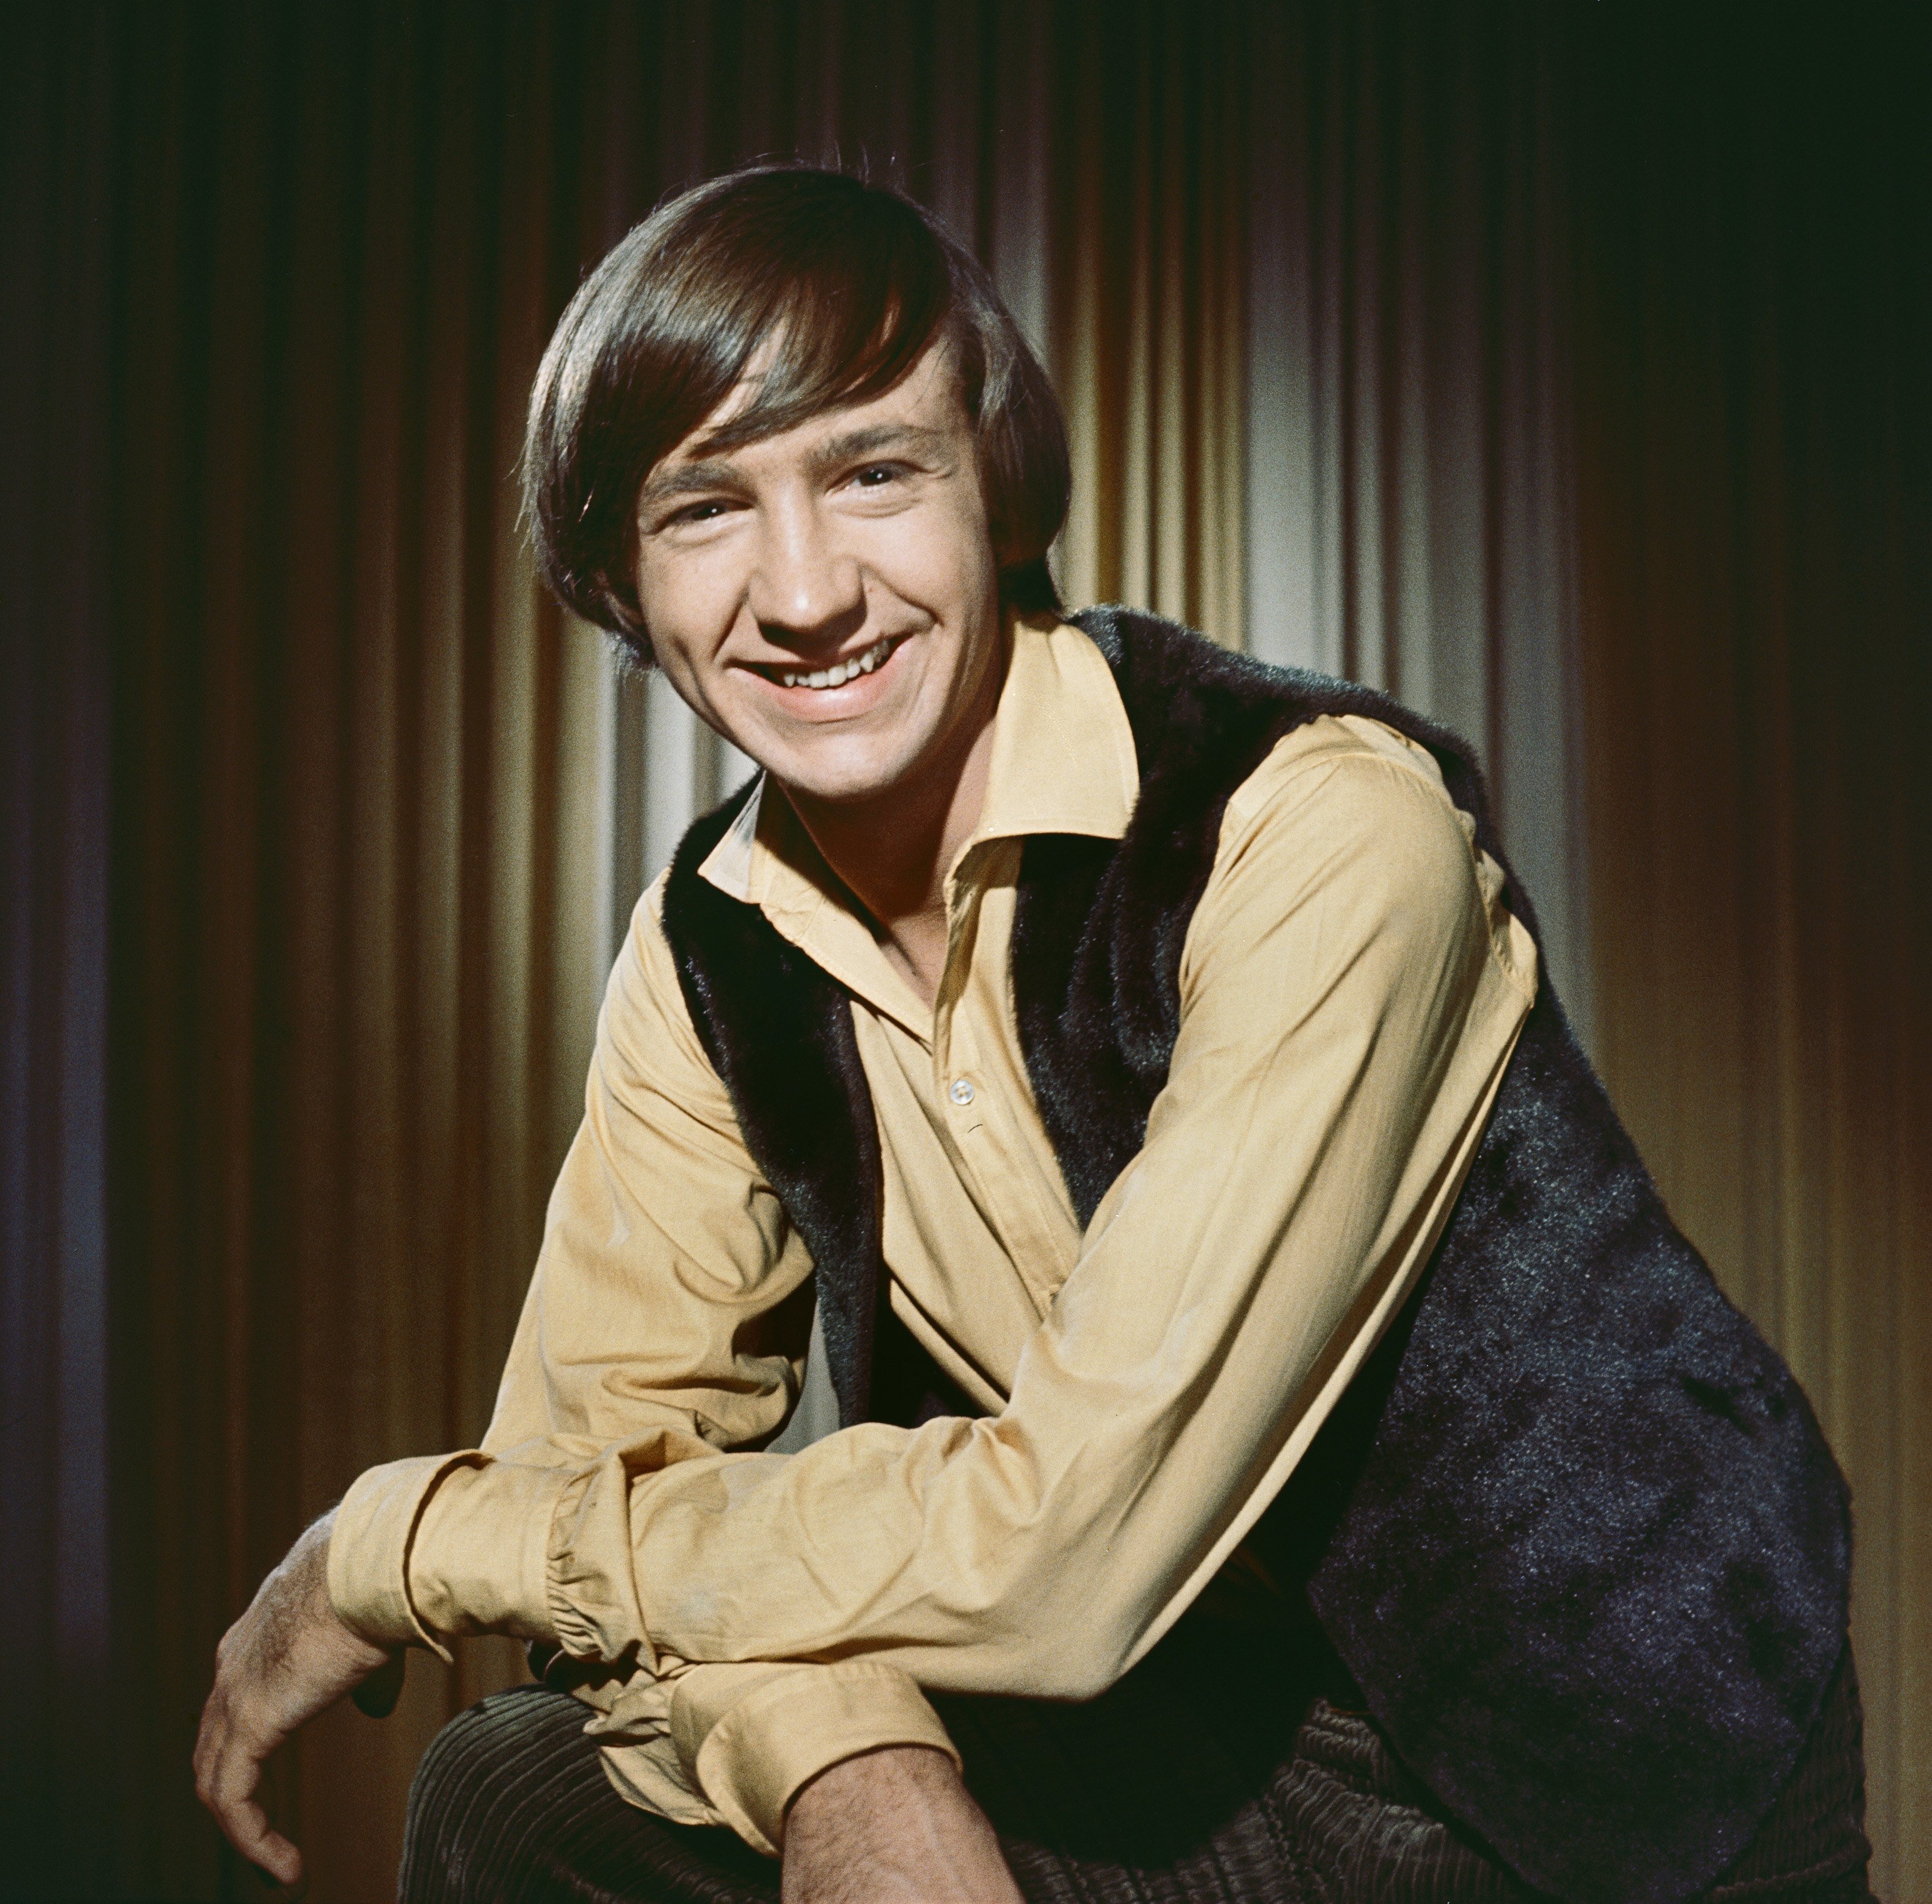  Peter Tork on the set of the television show The Monkees circa 1967 in Los Angeles, California. | Source: Getty Images